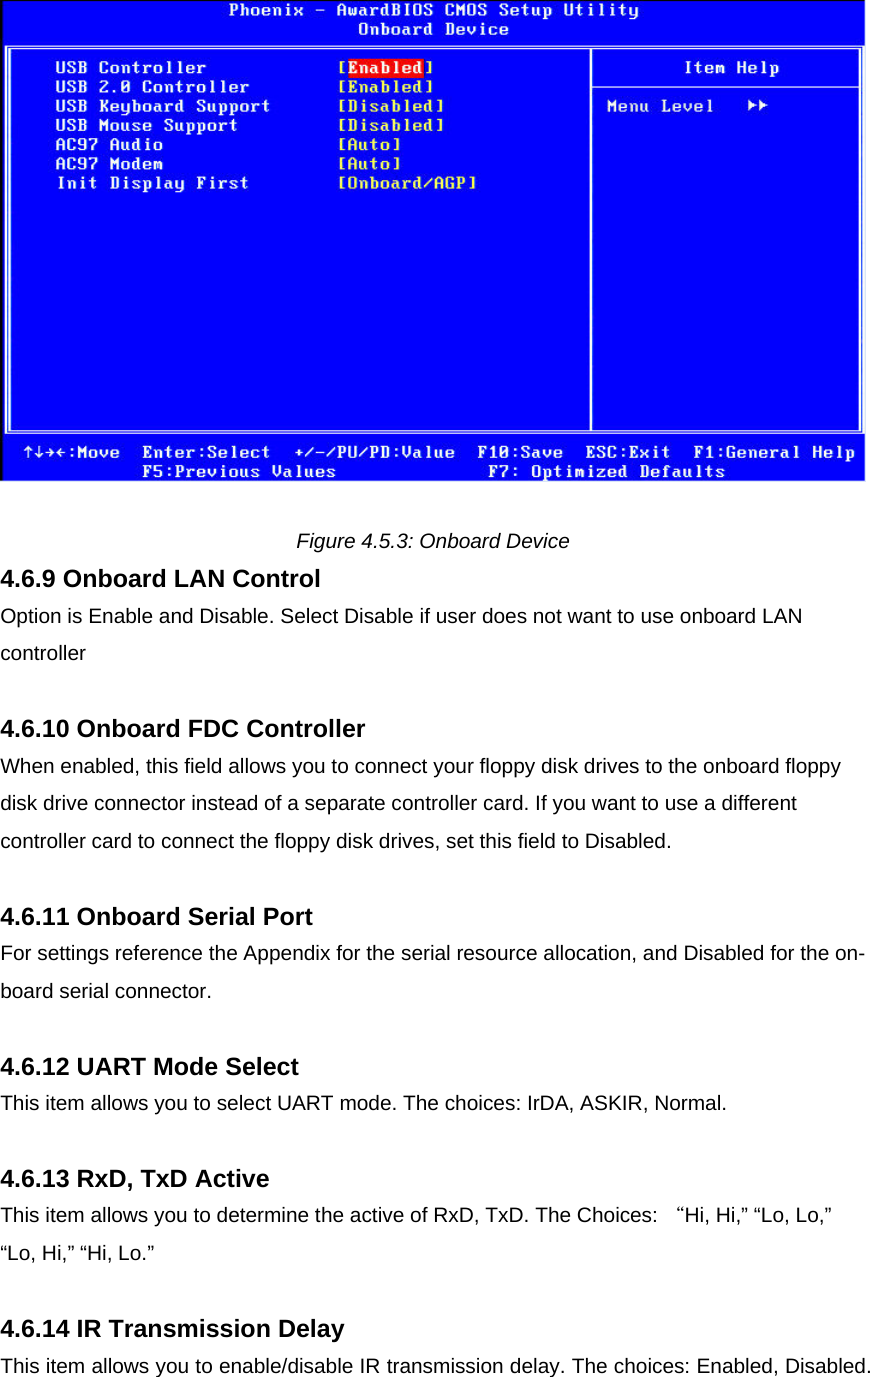   Figure 4.5.3: Onboard Device 4.6.9 Onboard LAN Control Option is Enable and Disable. Select Disable if user does not want to use onboard LAN controller  4.6.10 Onboard FDC Controller When enabled, this field allows you to connect your floppy disk drives to the onboard floppy disk drive connector instead of a separate controller card. If you want to use a different controller card to connect the floppy disk drives, set this field to Disabled.  4.6.11 Onboard Serial Port For settings reference the Appendix for the serial resource allocation, and Disabled for the on-board serial connector.  4.6.12 UART Mode Select This item allows you to select UART mode. The choices: IrDA, ASKIR, Normal.  4.6.13 RxD, TxD Active This item allows you to determine the active of RxD, TxD. The Choices: “Hi, Hi,” “Lo, Lo,” “Lo, Hi,” “Hi, Lo.”   4.6.14 IR Transmission Delay This item allows you to enable/disable IR transmission delay. The choices: Enabled, Disabled.   